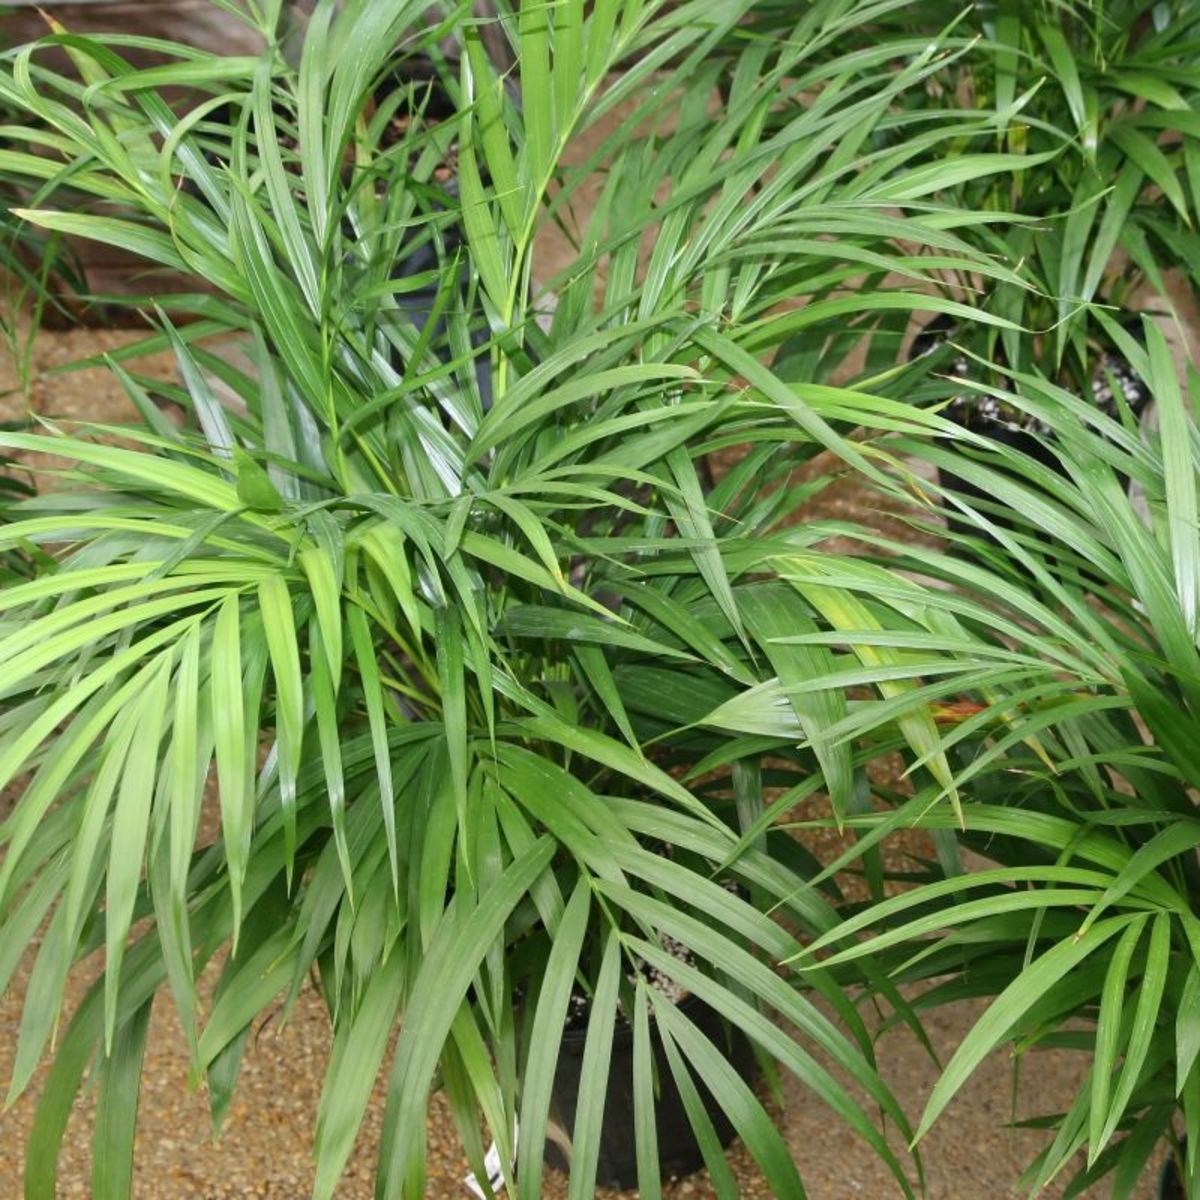 When it comes to areca palms, always look under the fronds to check for spider mites.